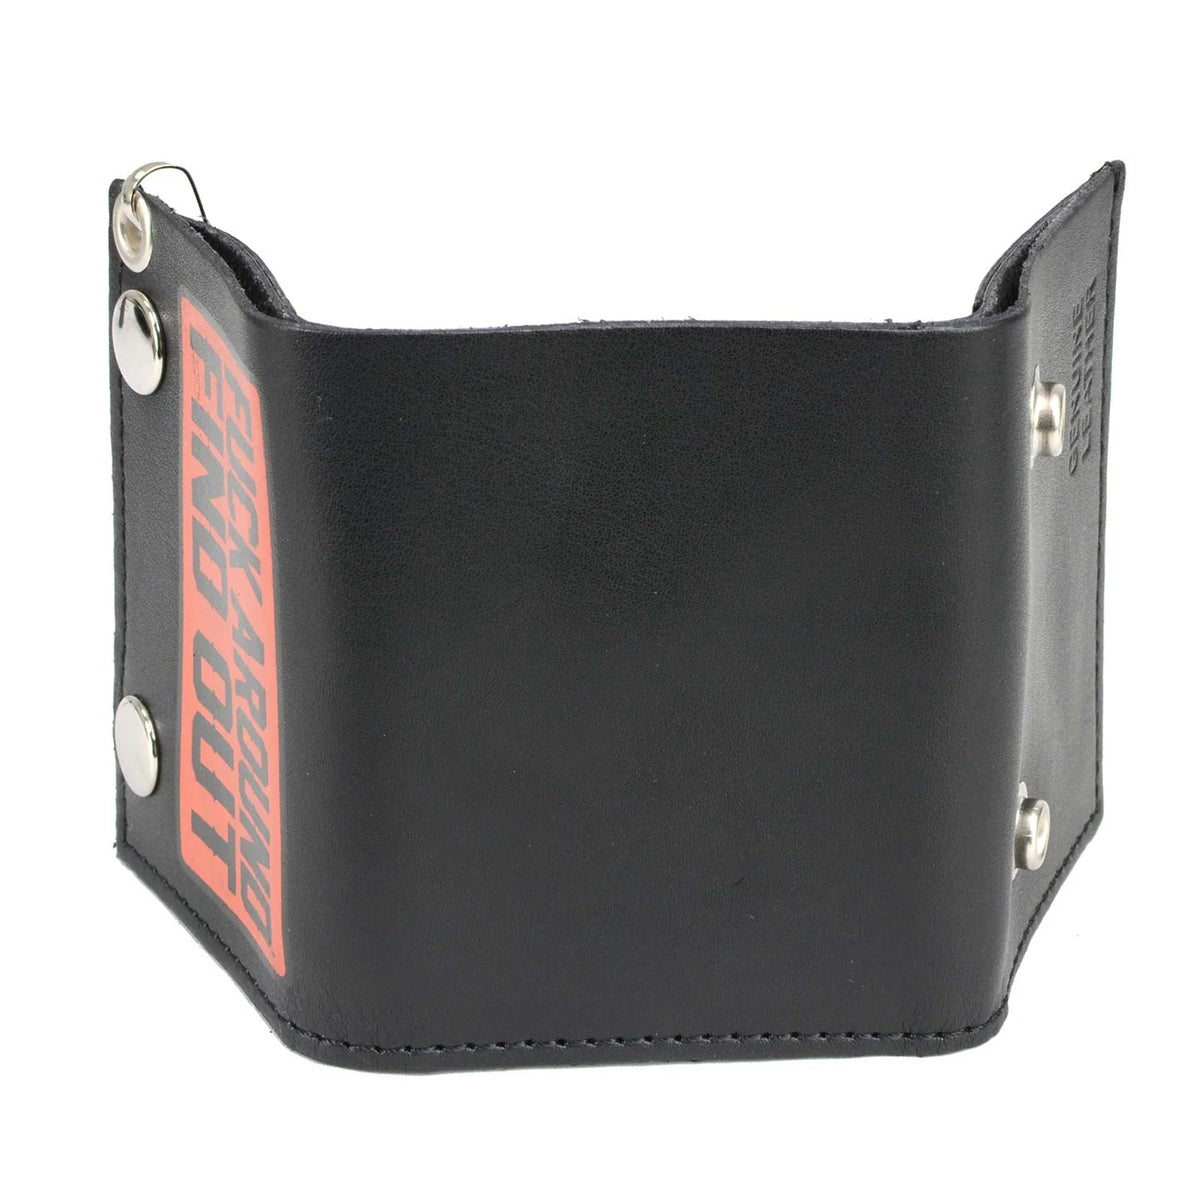 Men's 4” Leather “F.A.F.O.” Tri-Fold Biker Wallet w/ Anti-Theft Stainless Steel Chain